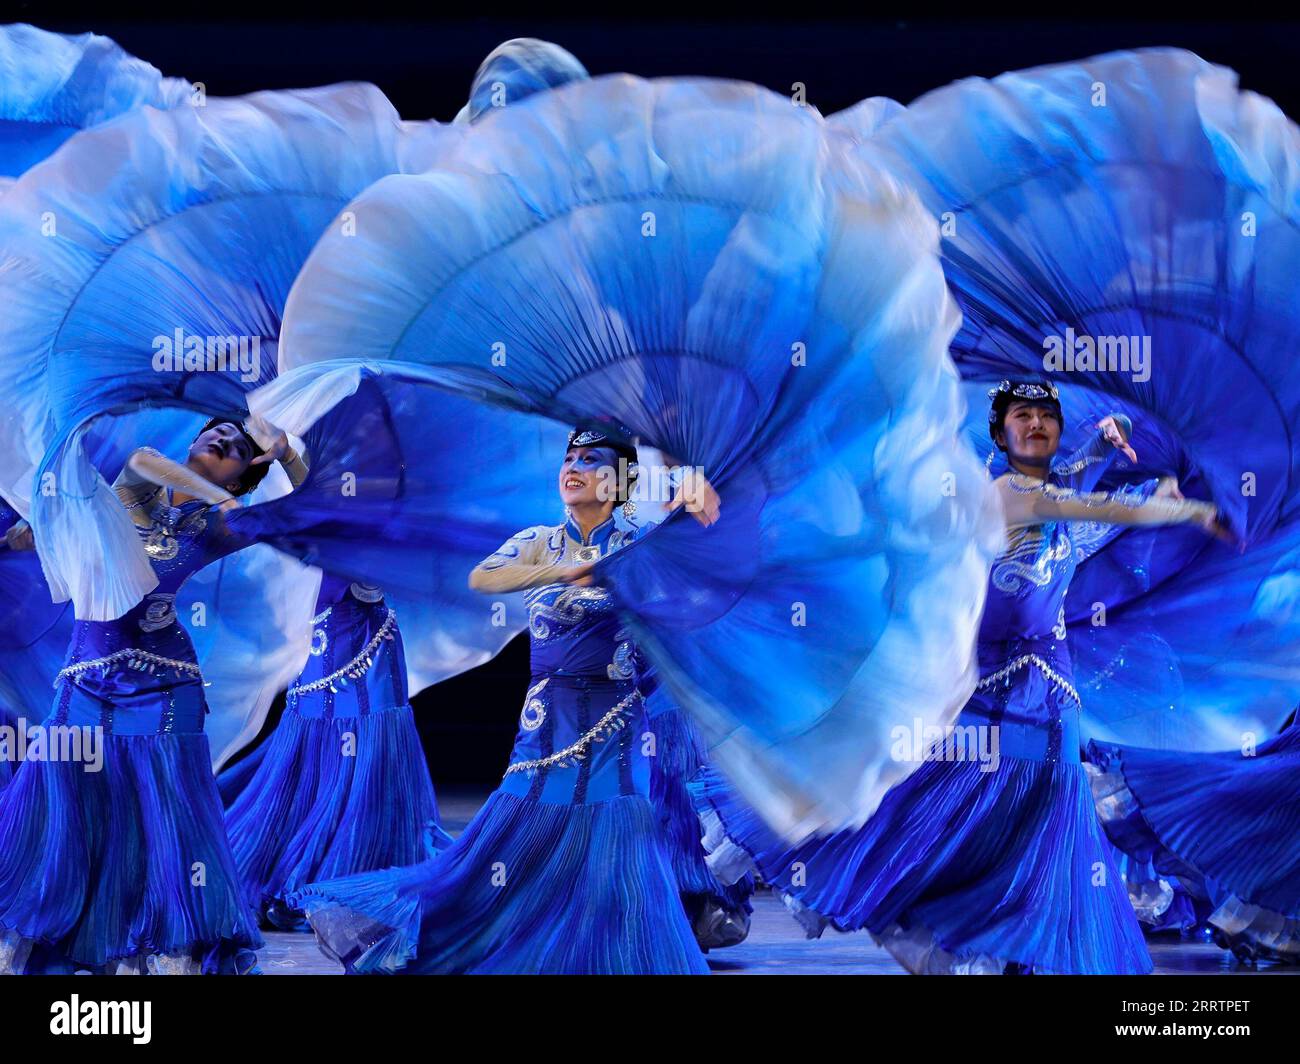 230804 -- CHENGDU, Aug. 4, 2023 -- Artists perform during one of the shows themed Be Together at the Village of the 31st FISU Summer World University Games in Chengdu, southwest China s Sichuan Province, Aug. 4, 2023.  Chengdu UniversiadeCHINA-CHENGDU-WORLD UNIVERSITY GAMES-PERFORMANCE CN ShenxBohan PUBLICATIONxNOTxINxCHN Stock Photo